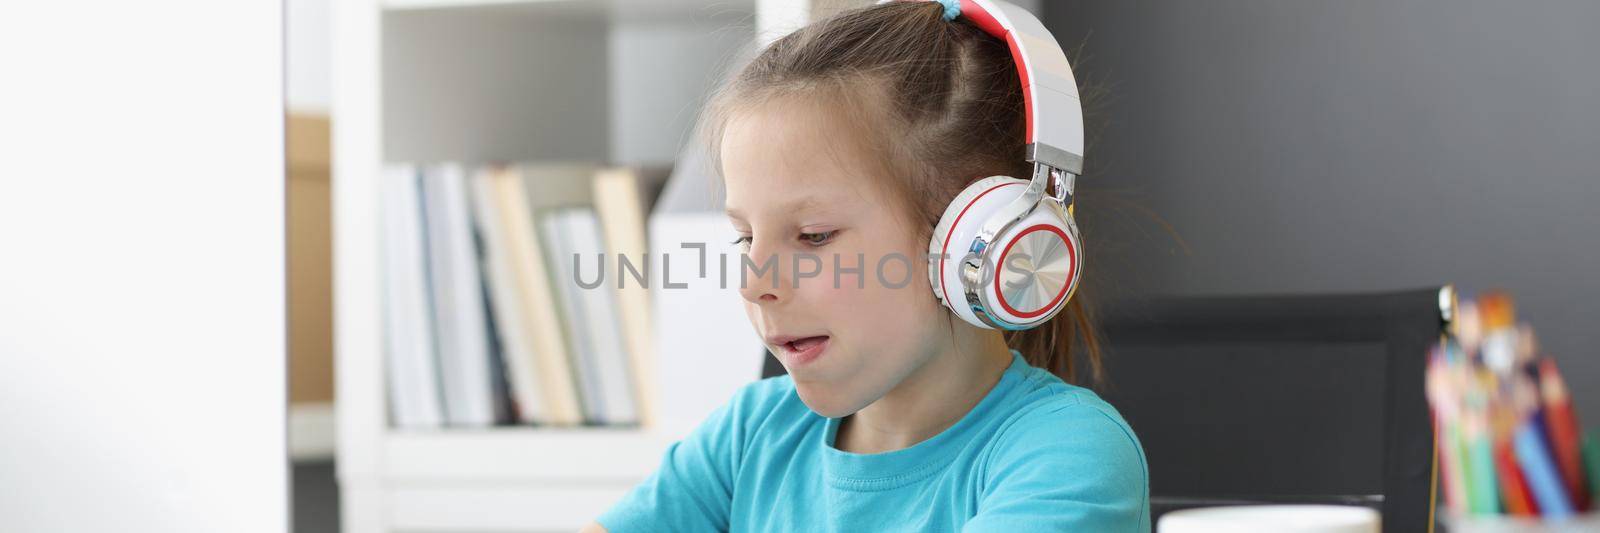 Portrait of cute kid wearing headset and typing on keyboard with effort. Child explore new technology, try computer in use. Childhood, development concept